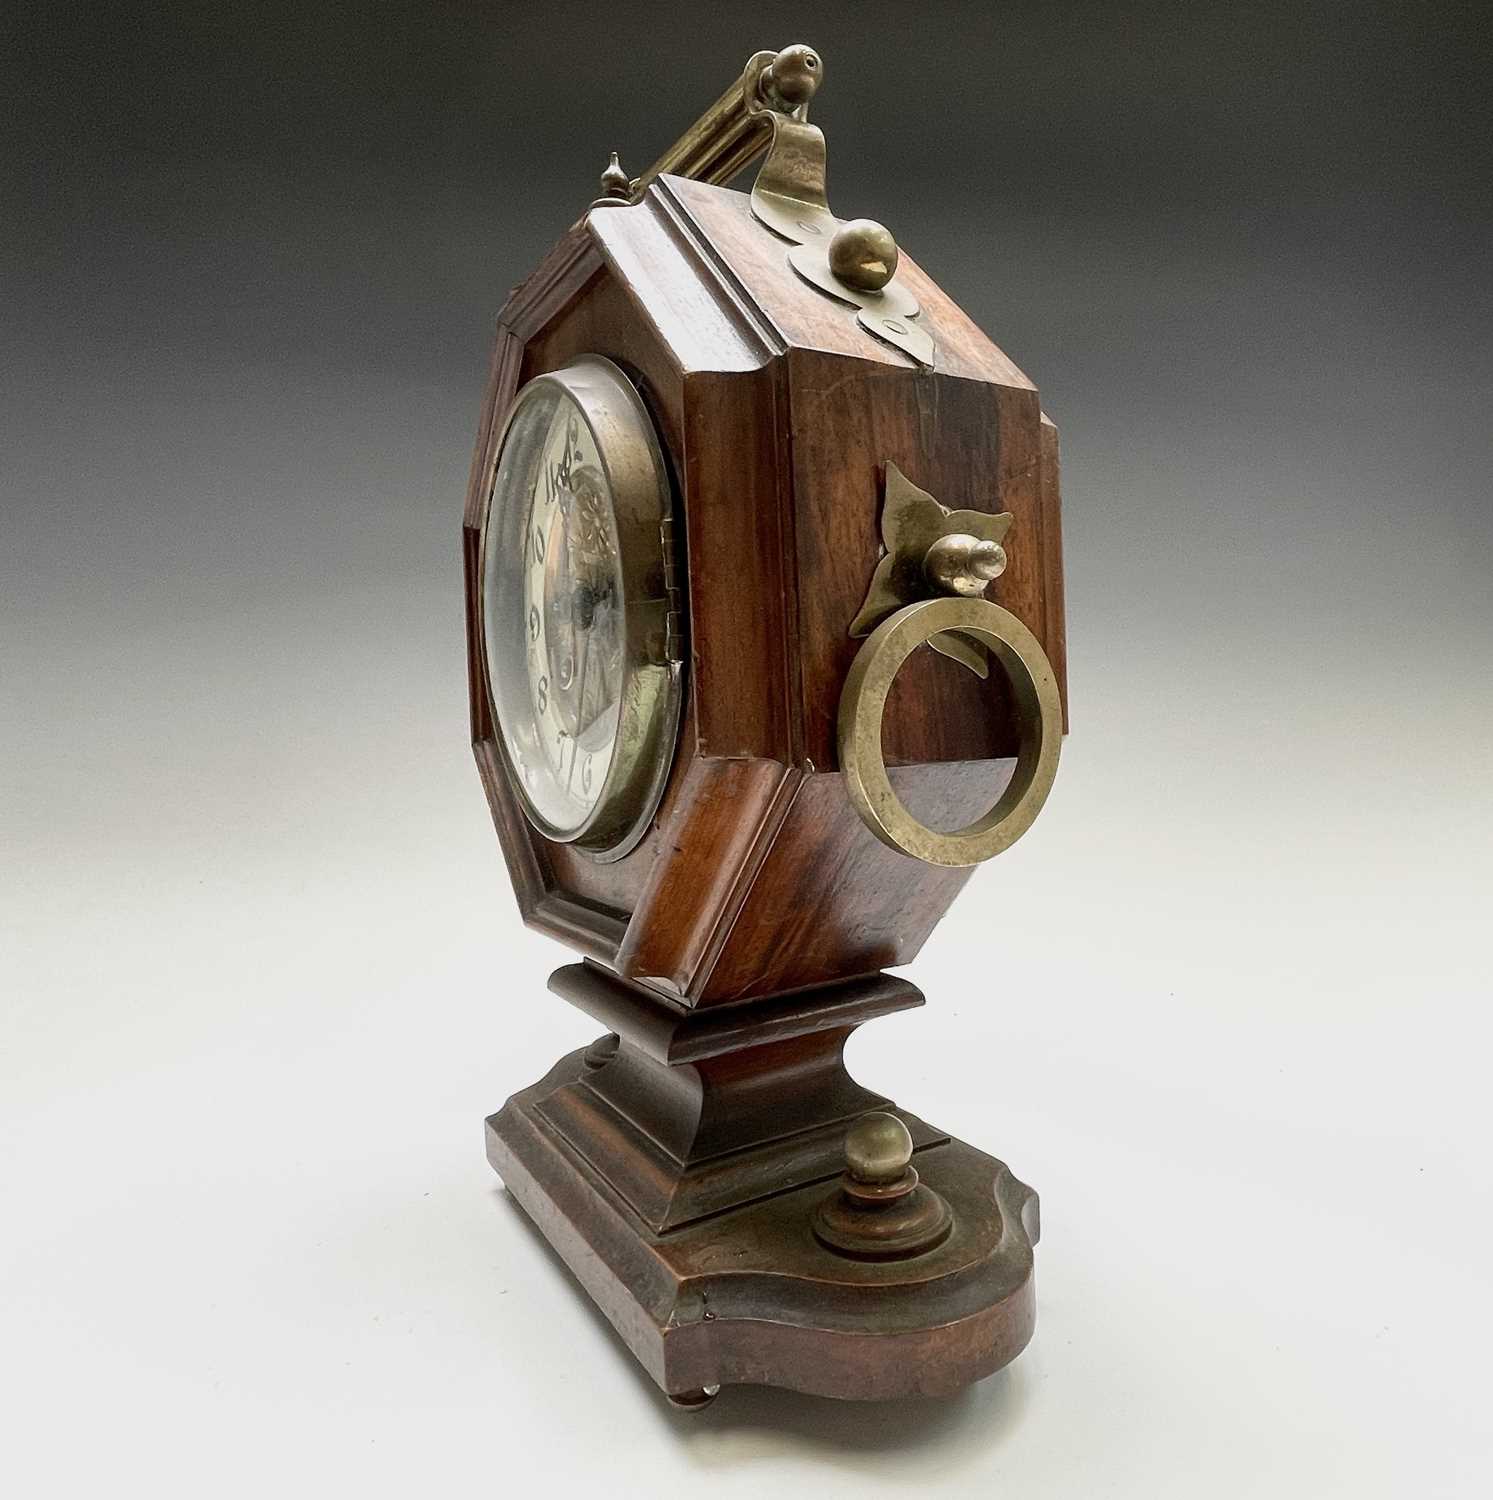 A German walnut and brass mantel clock, circa 1900, in the Aesthetic taste, with octagonal case - Image 4 of 11